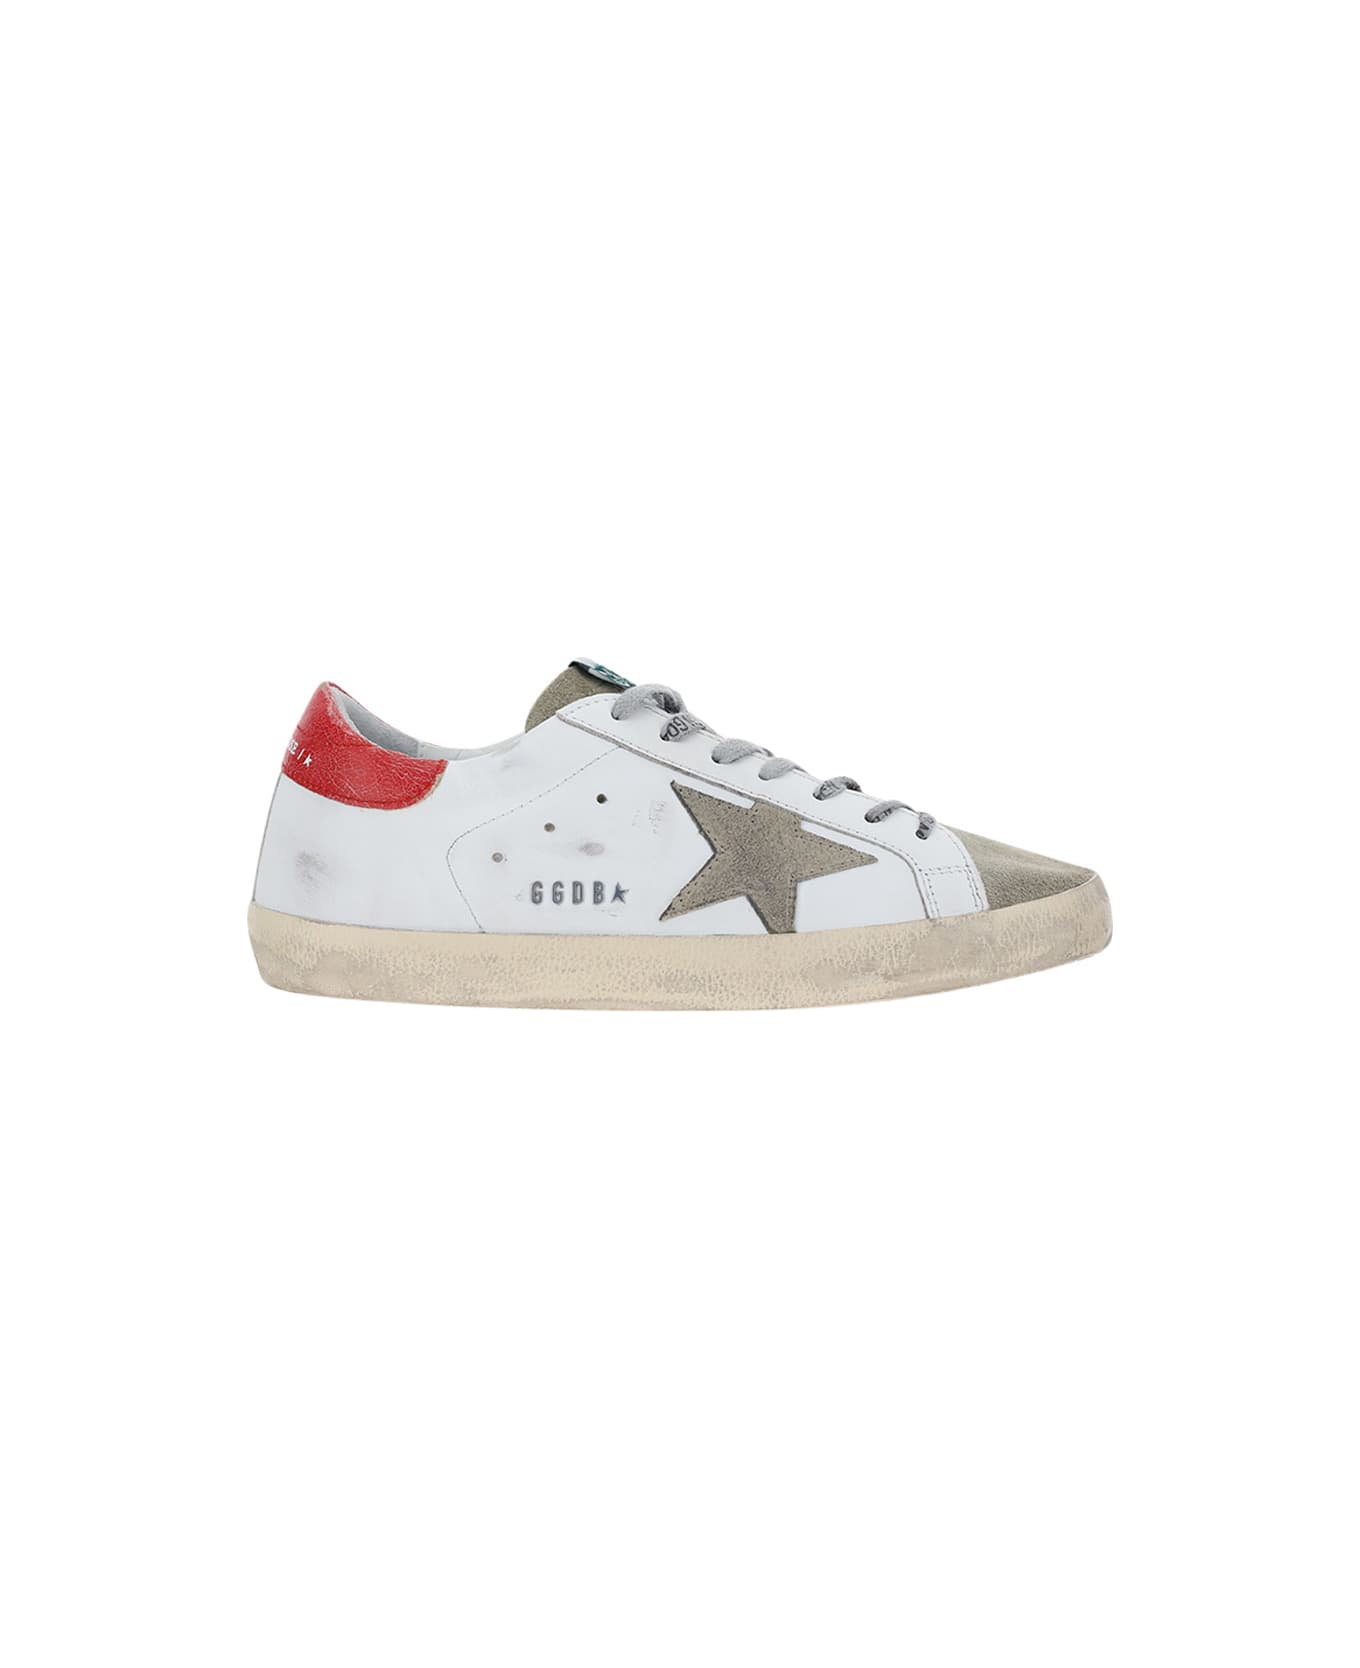 Golden Goose Super Star Sneakers - White/taupe/red